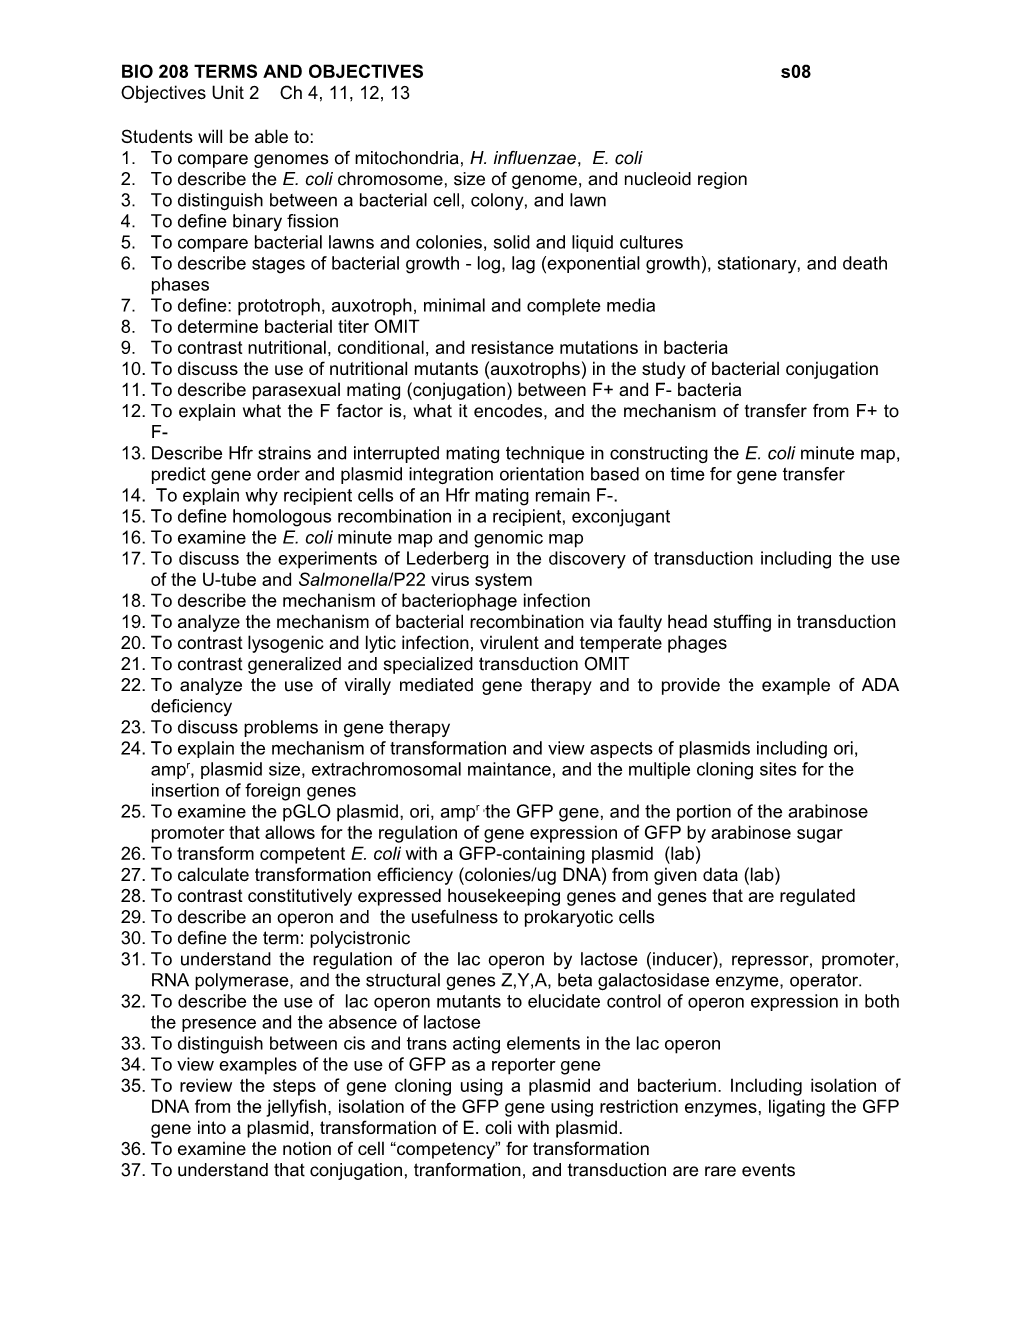 BIO 208 TERMS and OBJECTIVES S08